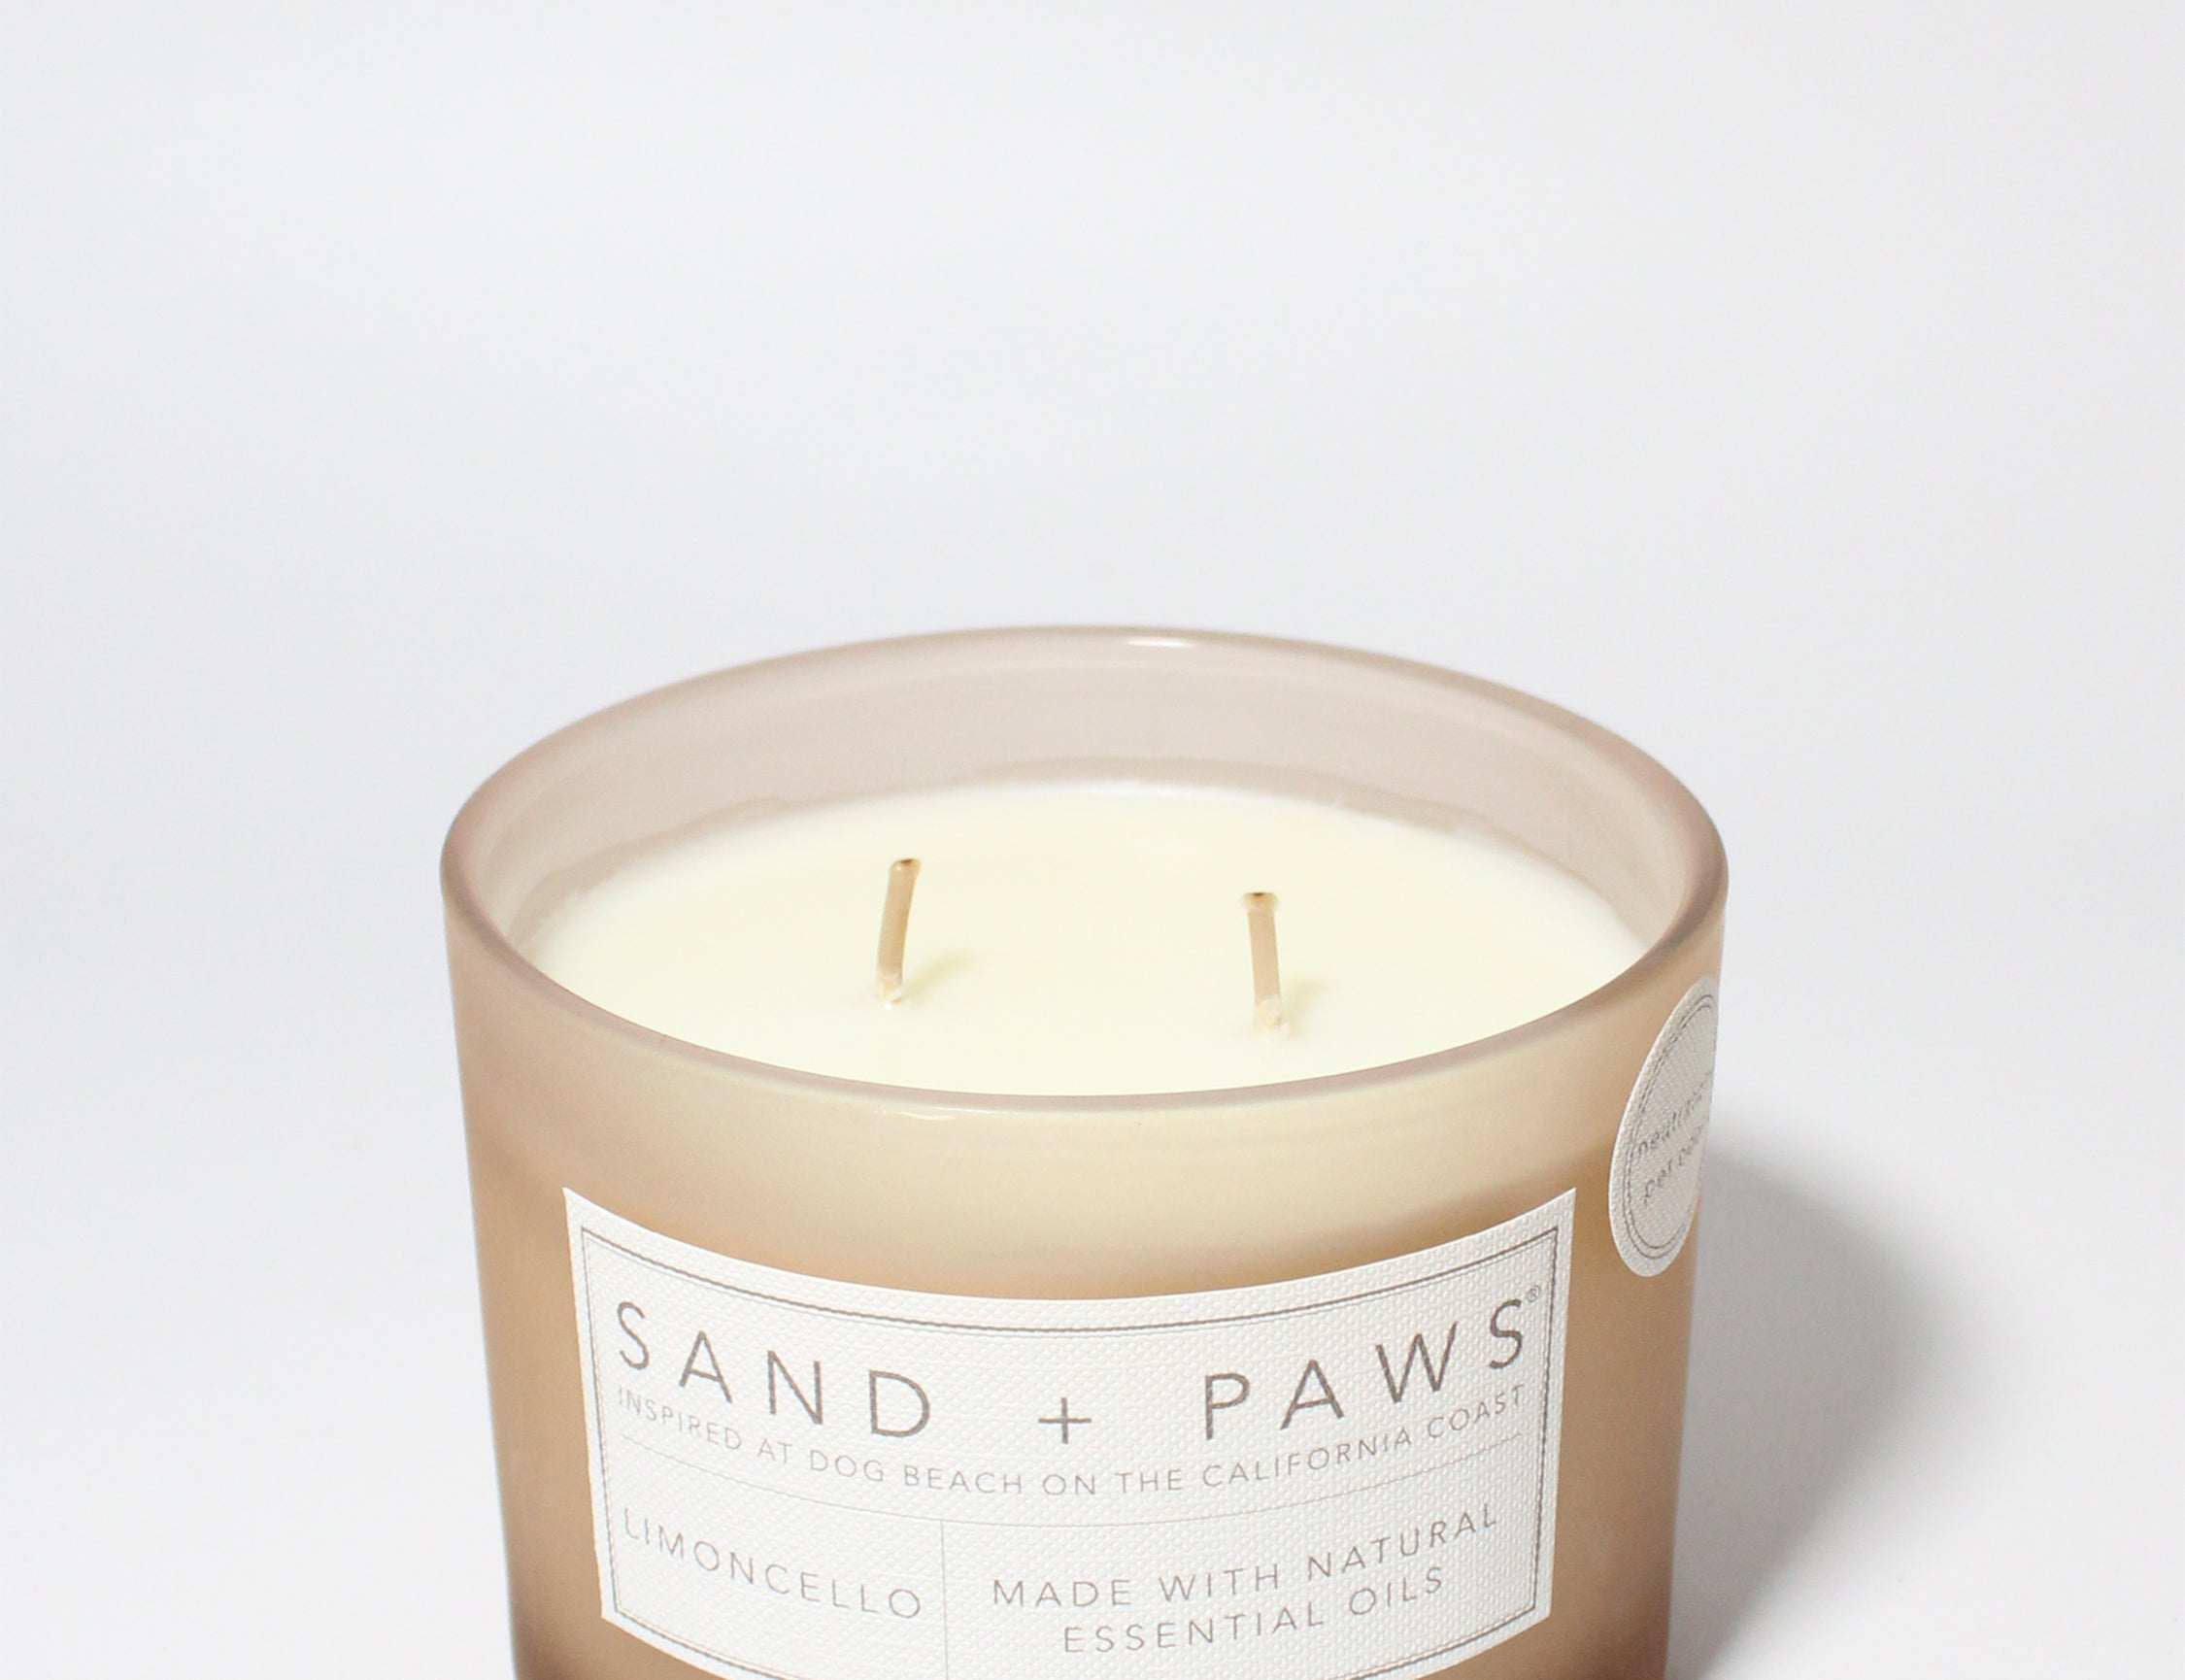 Sand + Paws Limoncello 12 oz scented candle Soft Pink vessel with WOOF dog face lid